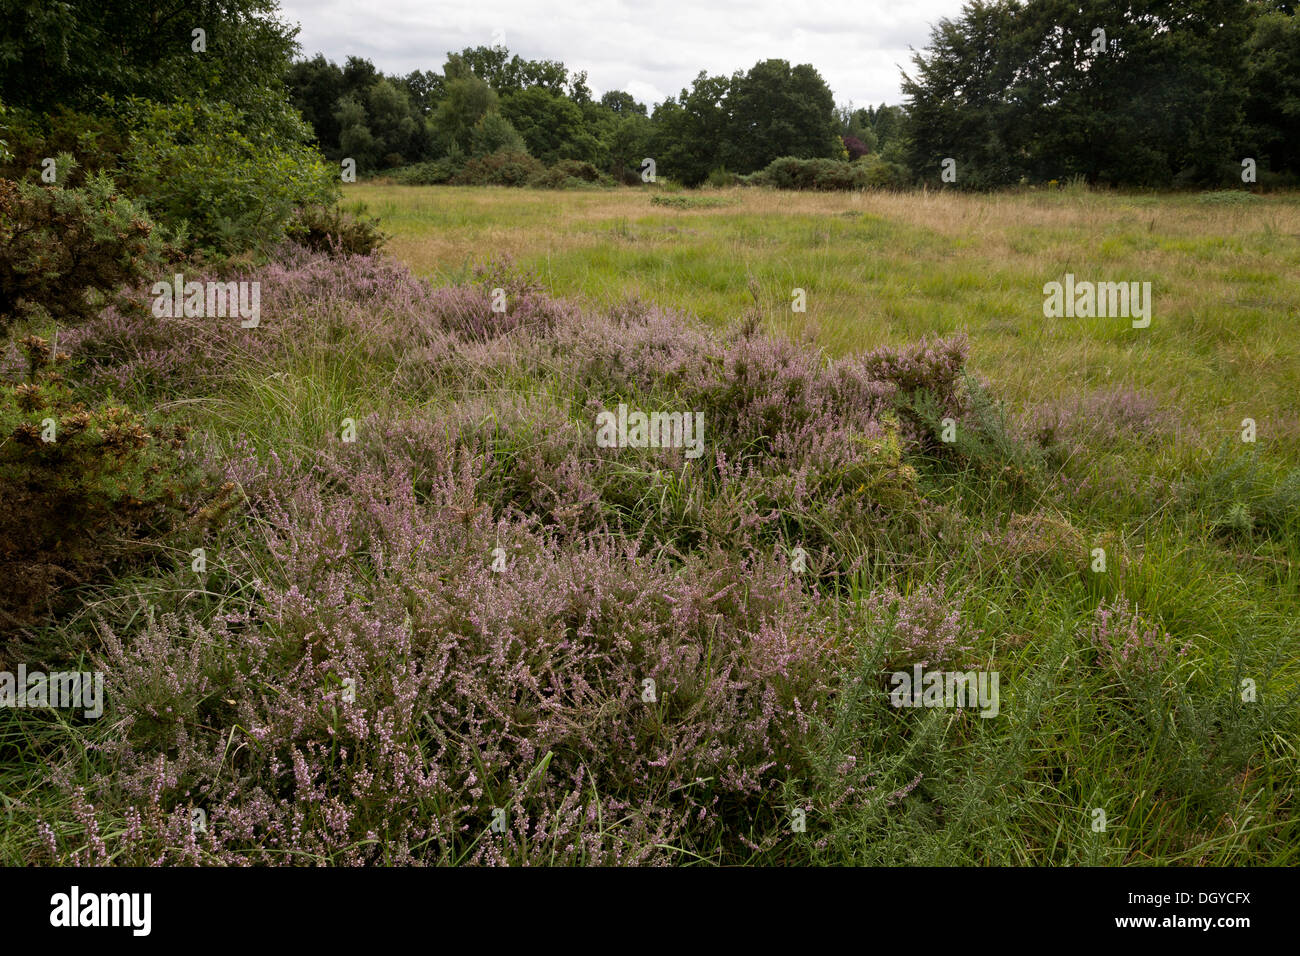 Heathy Village Green at Chobham, managed as part of Chobham Common National Nature Reserve, by Surrey Wildlife Trust, Surrey. Stock Photo